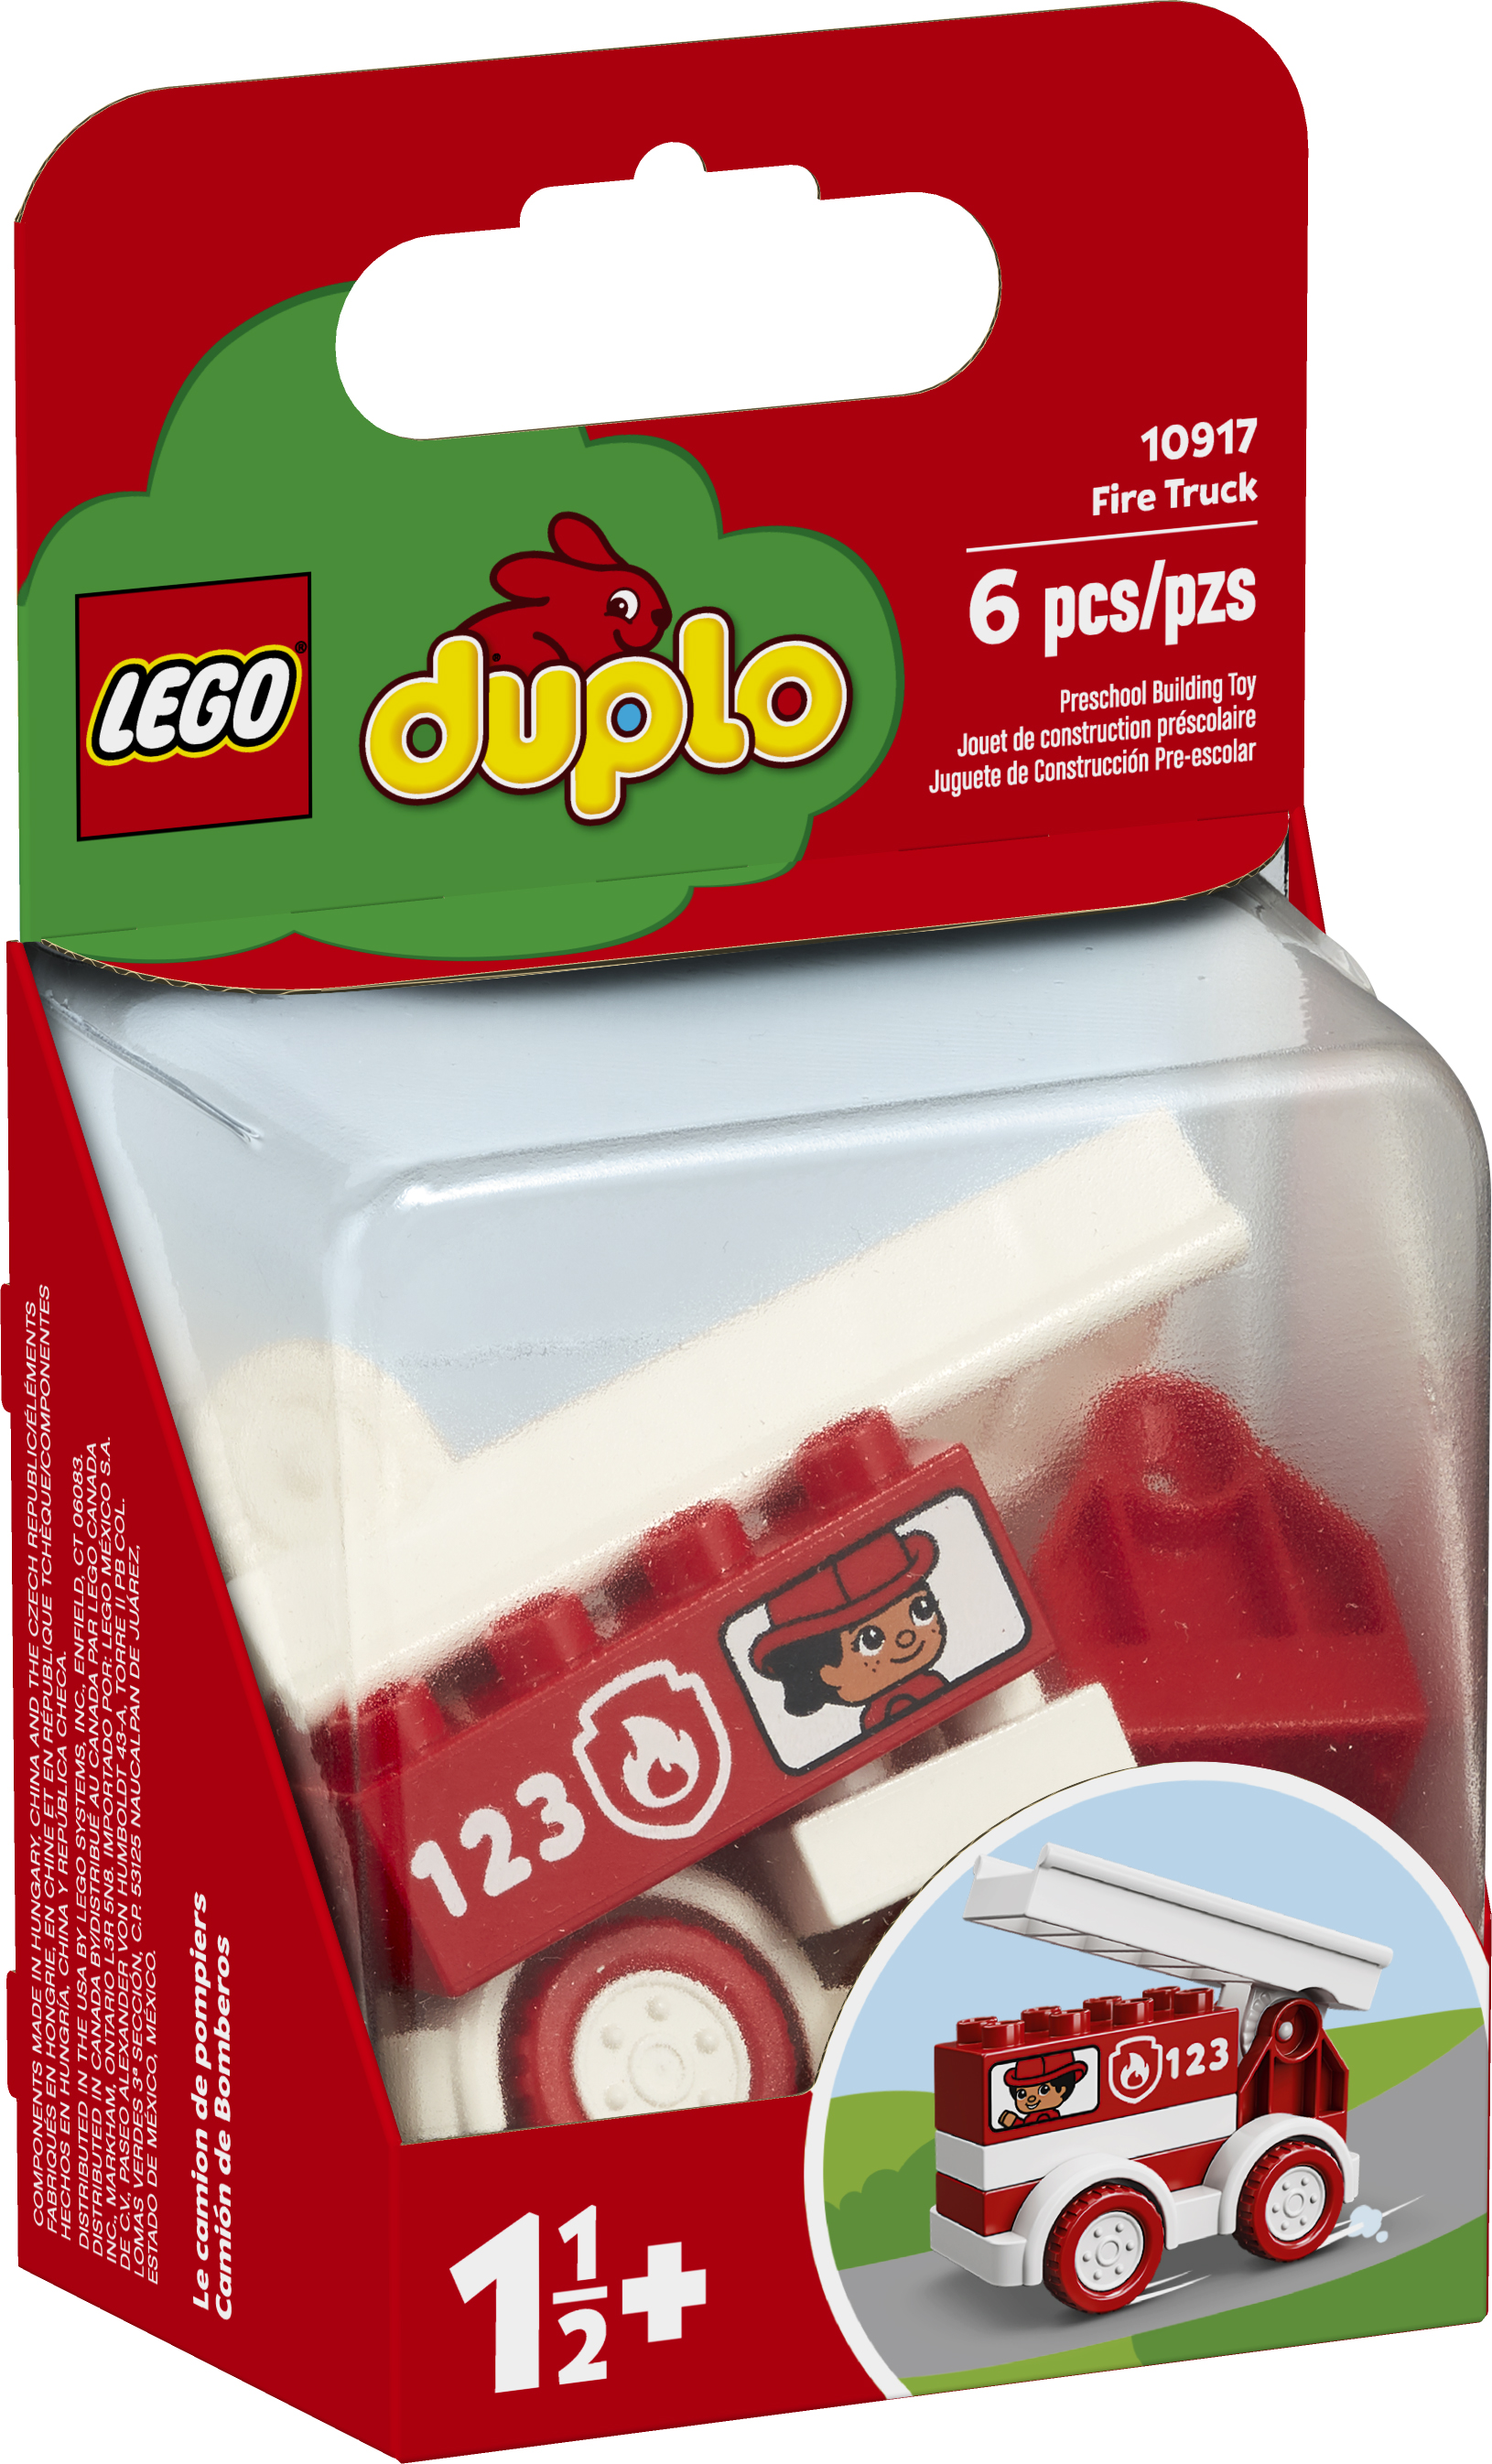 LEGO DUPLO My First Fire Truck 10917 Educational Building Toy for Toddlers (6 Pieces) - image 4 of 6